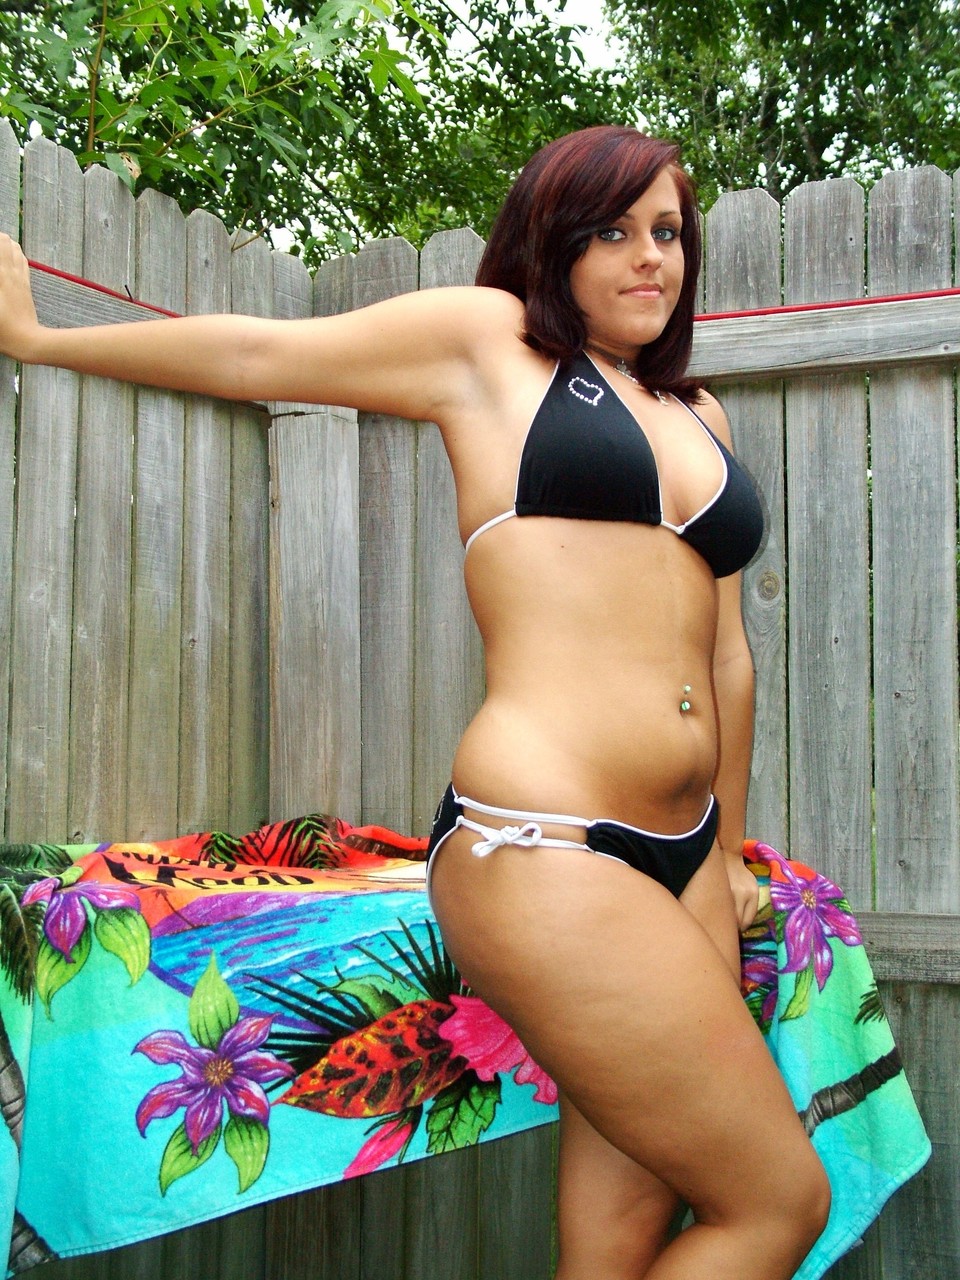 Chubby amateur teen Roxy displays her huge juggs and poses in the back yard Porno-Foto #425617654 | Teen Girl Photos Pics, Amateur, Mobiler Porno